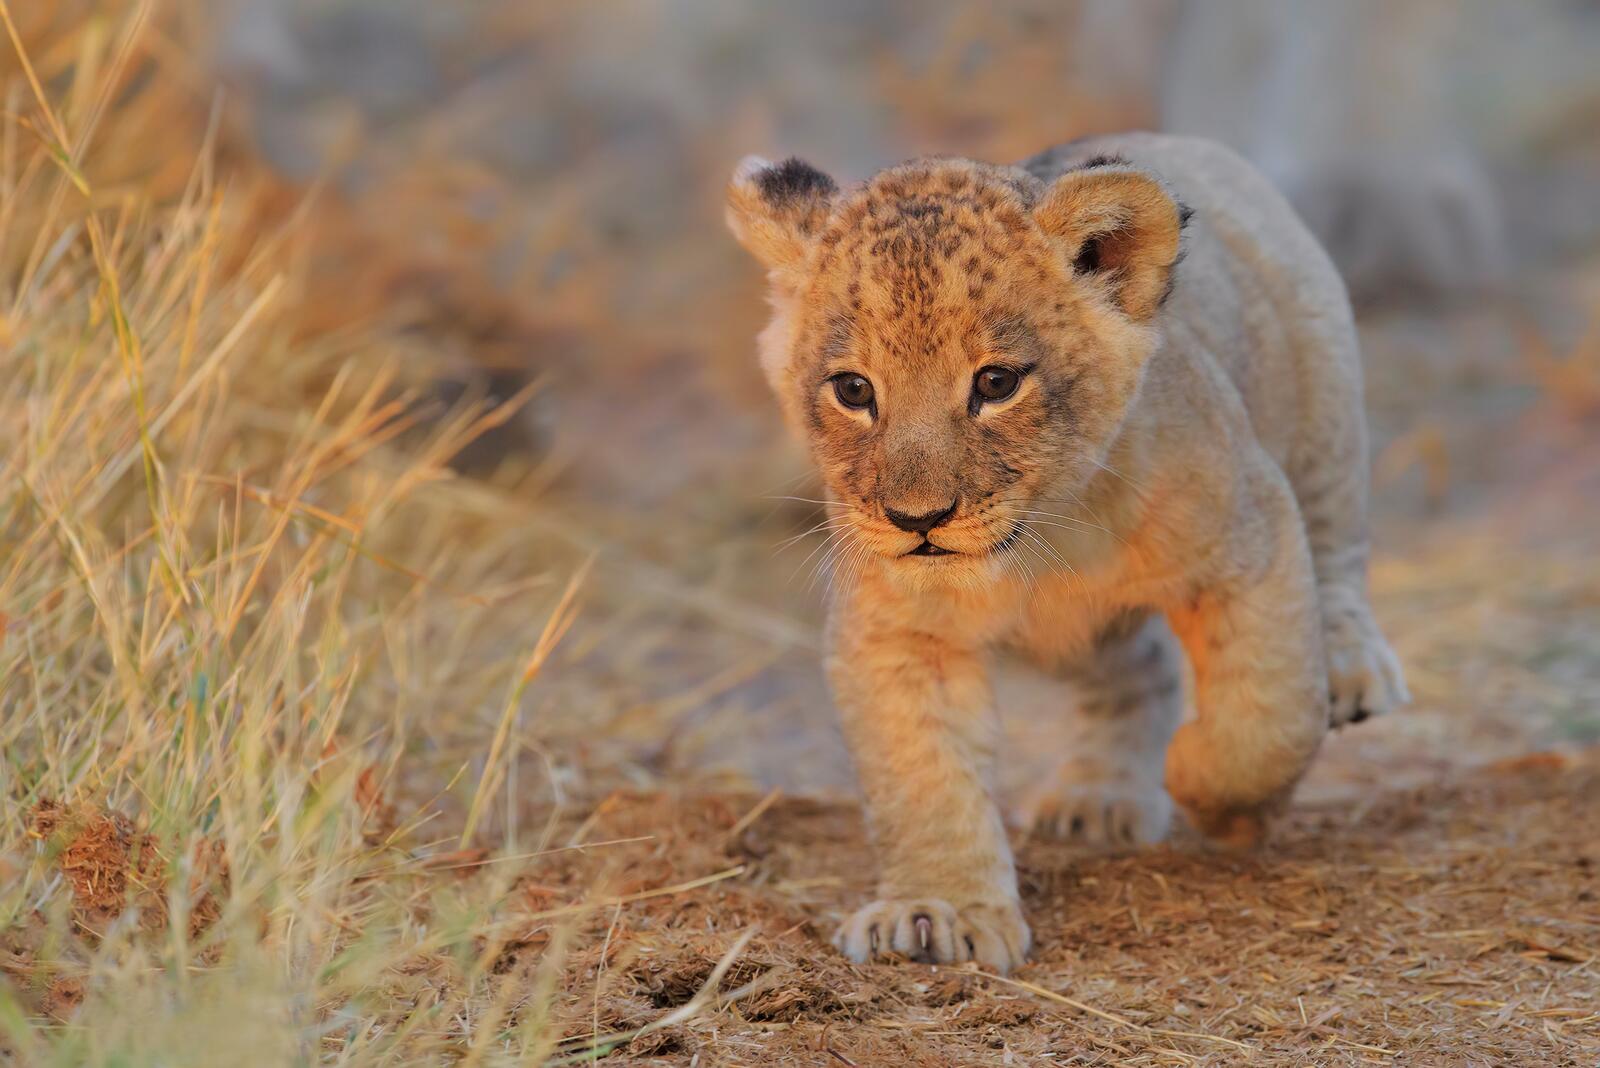 Free photo A baby lion exploring its surroundings